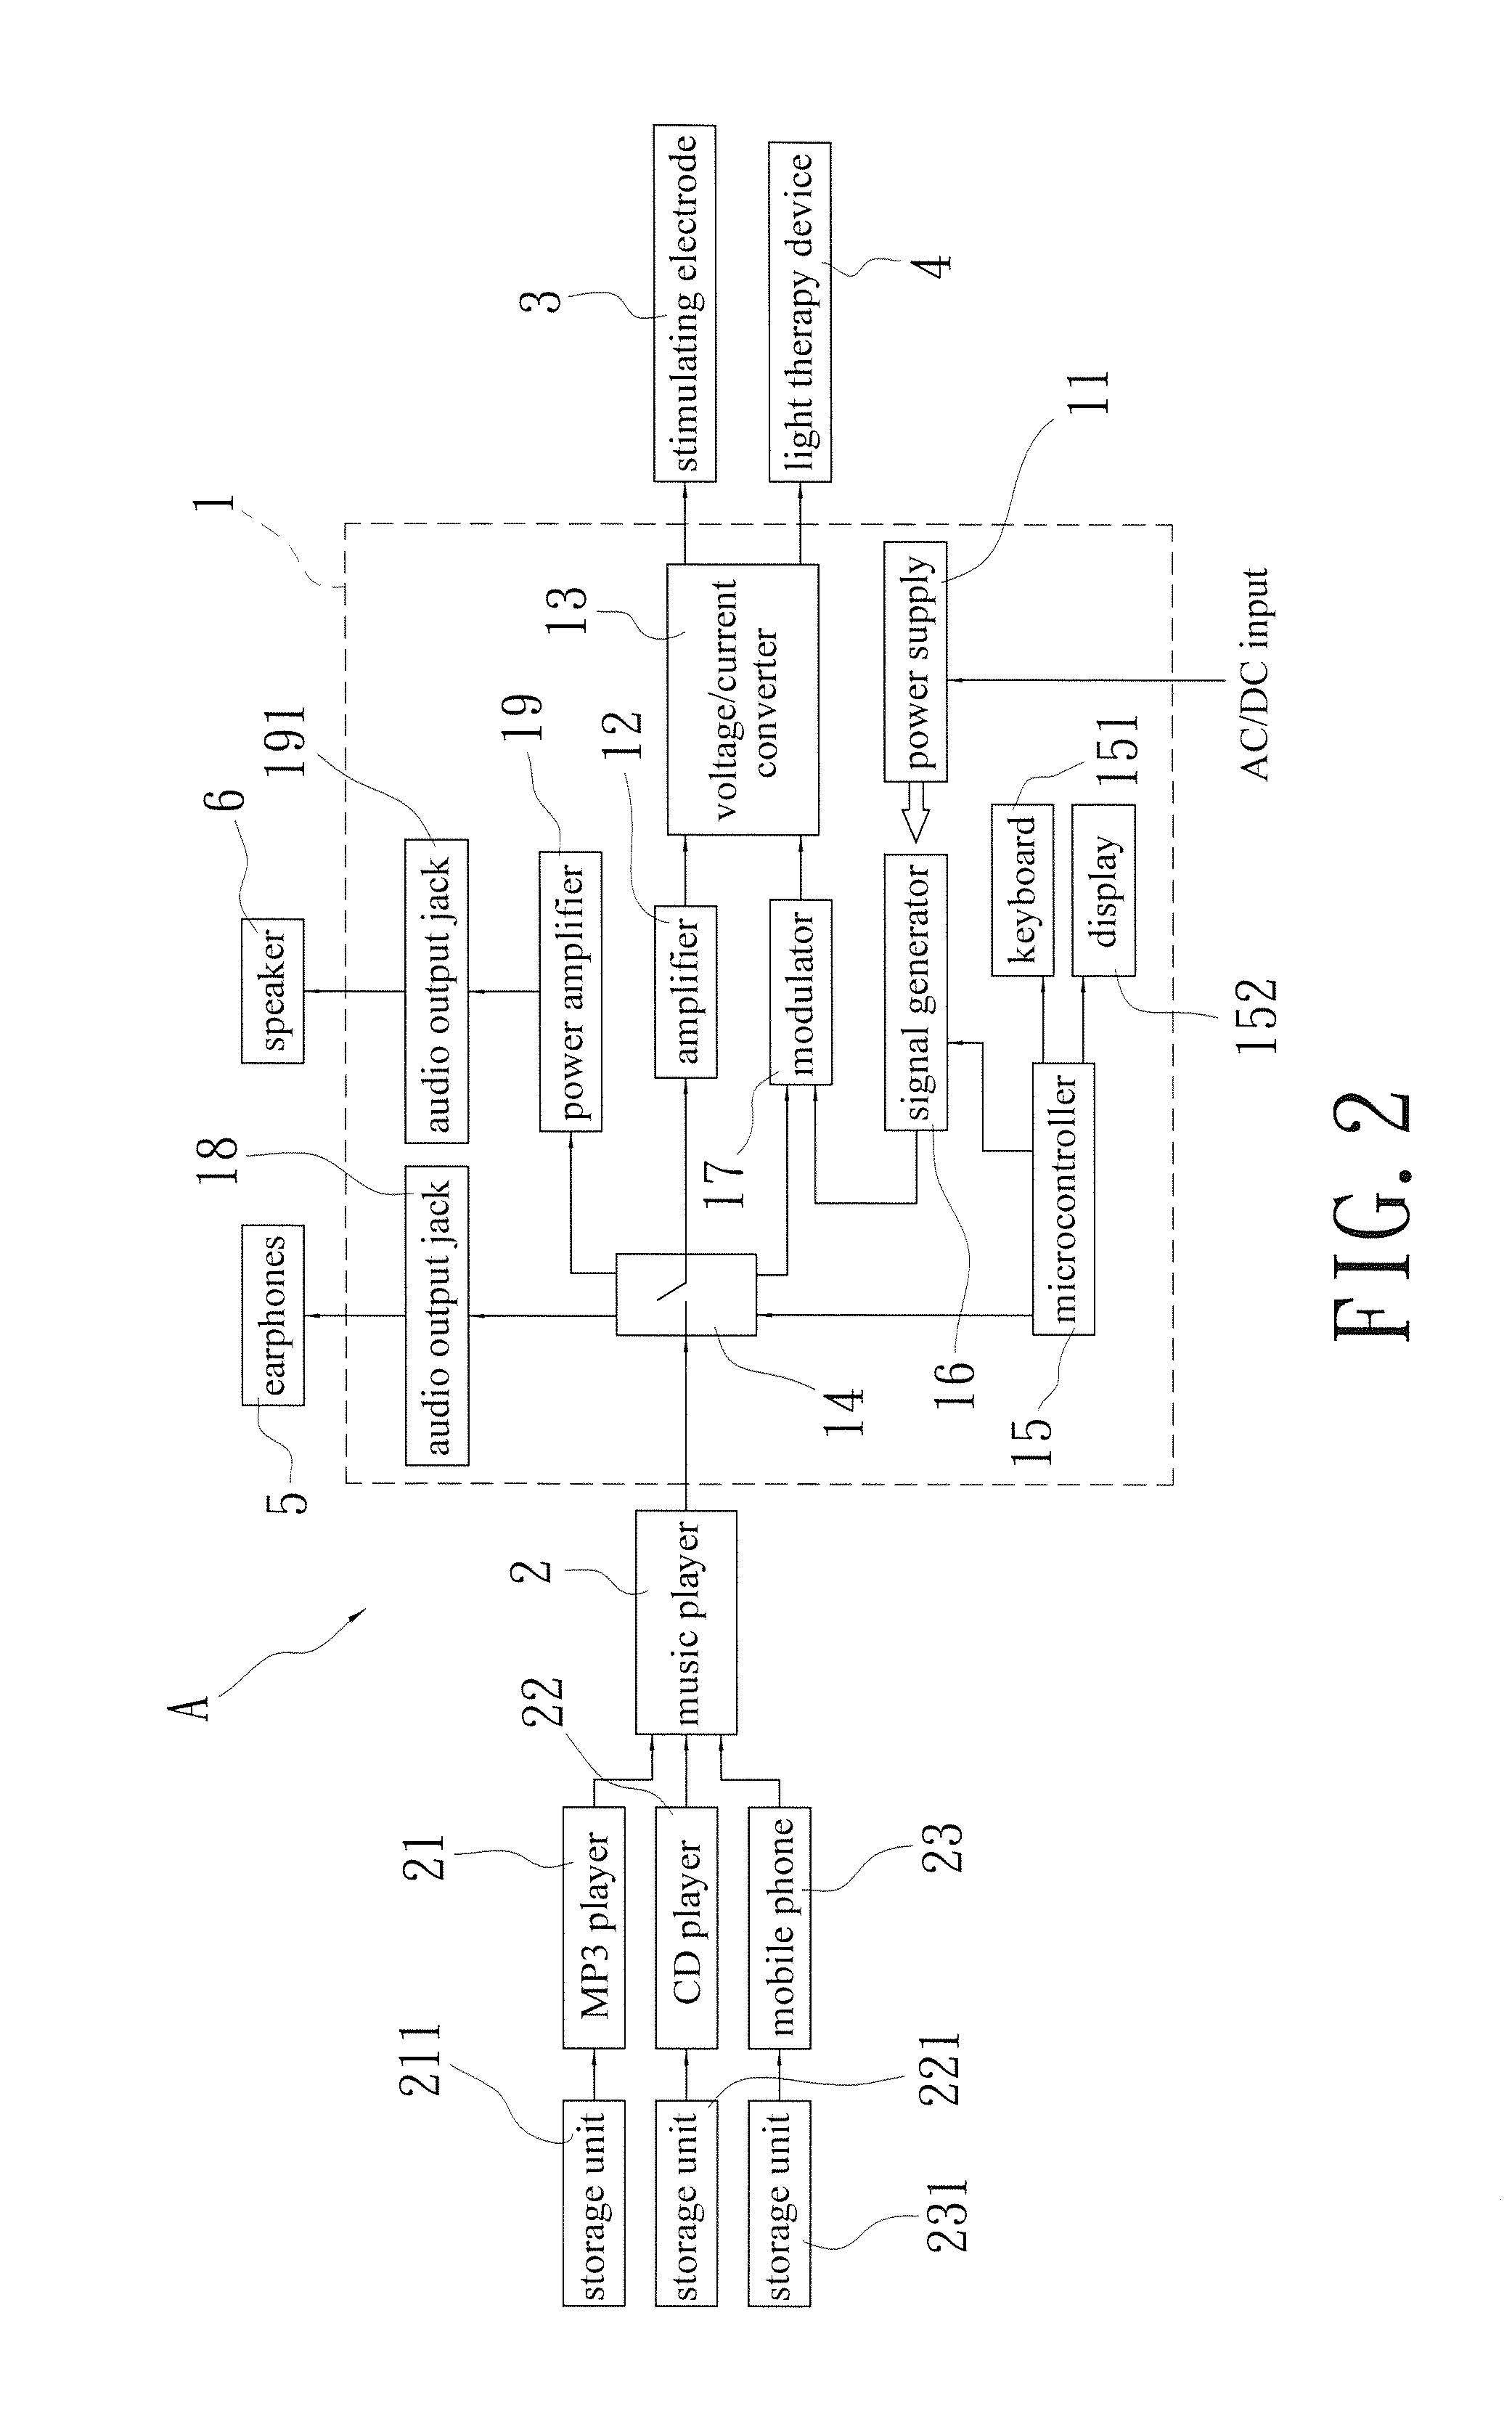 Device for converting music signal to electrical stimulation